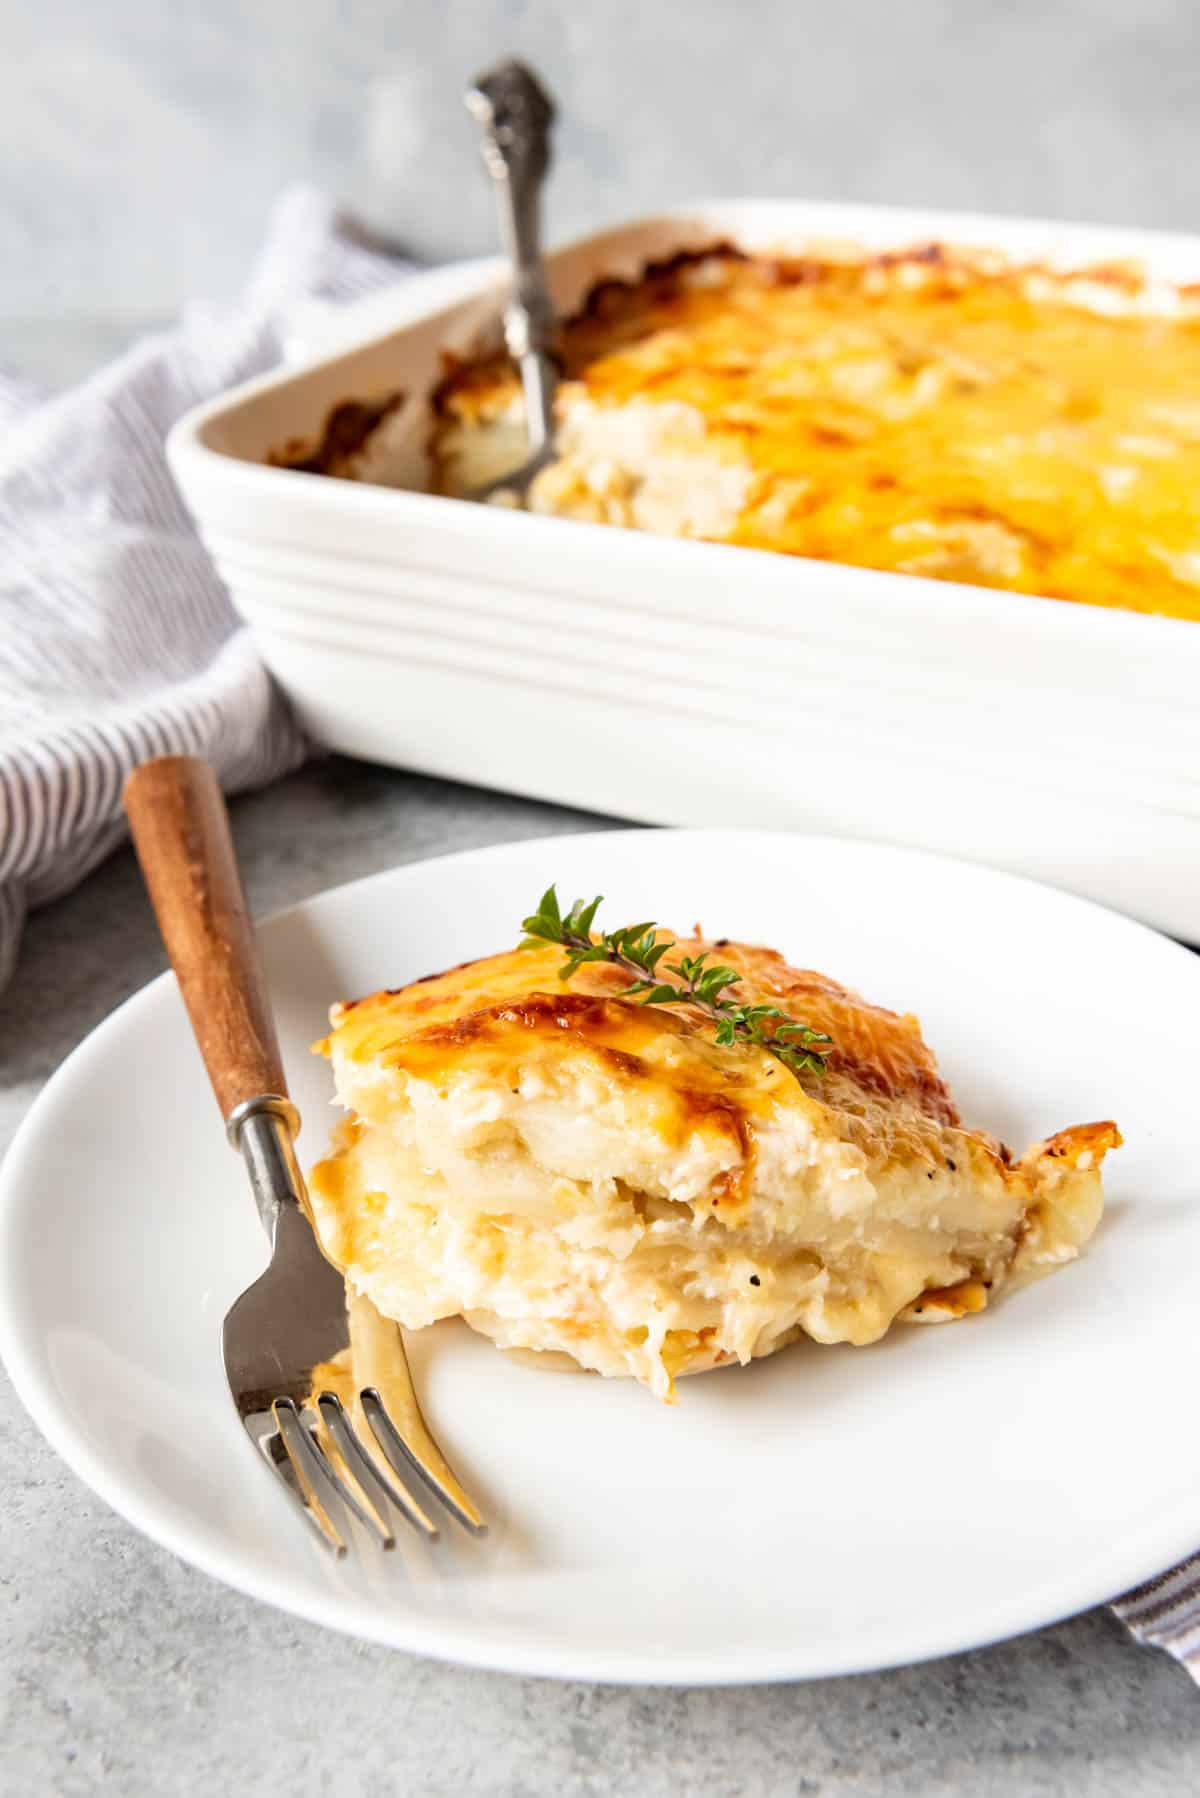 An image of a serving of cheesy au gratin potatoes on a plate next to a casserole dish full of this easy Easter side dish.